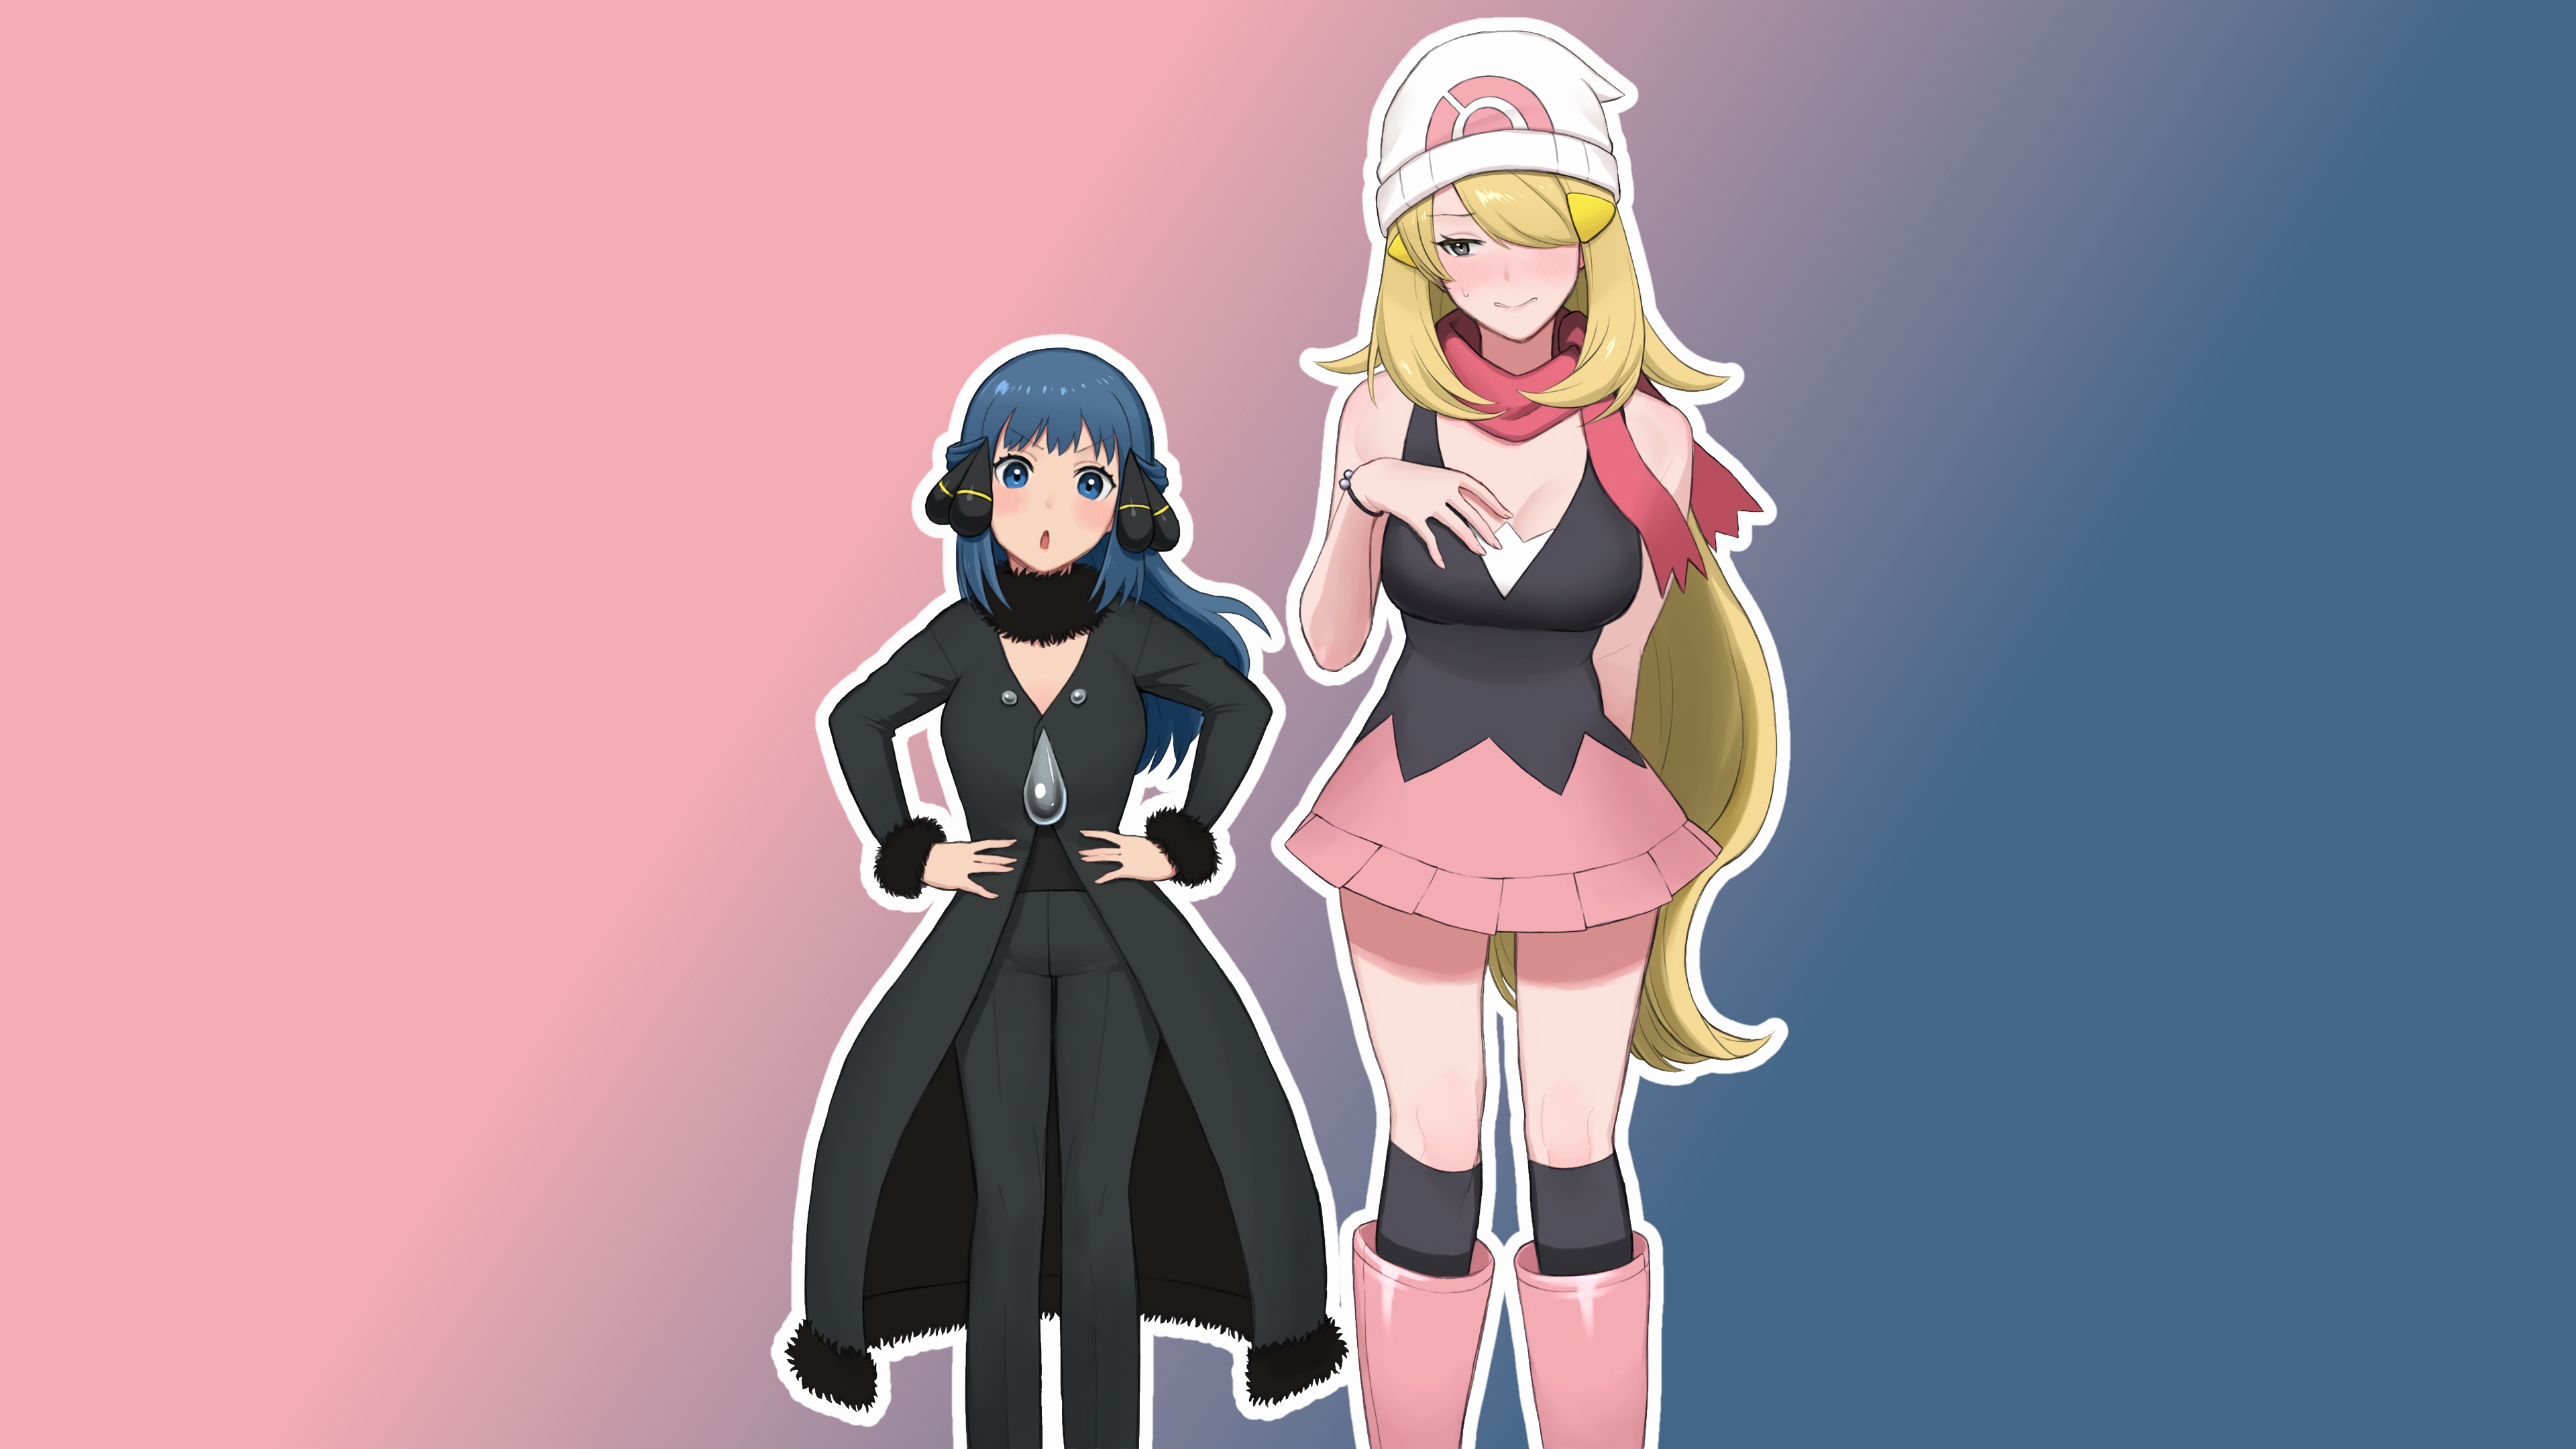 how old is dawn from pokemon